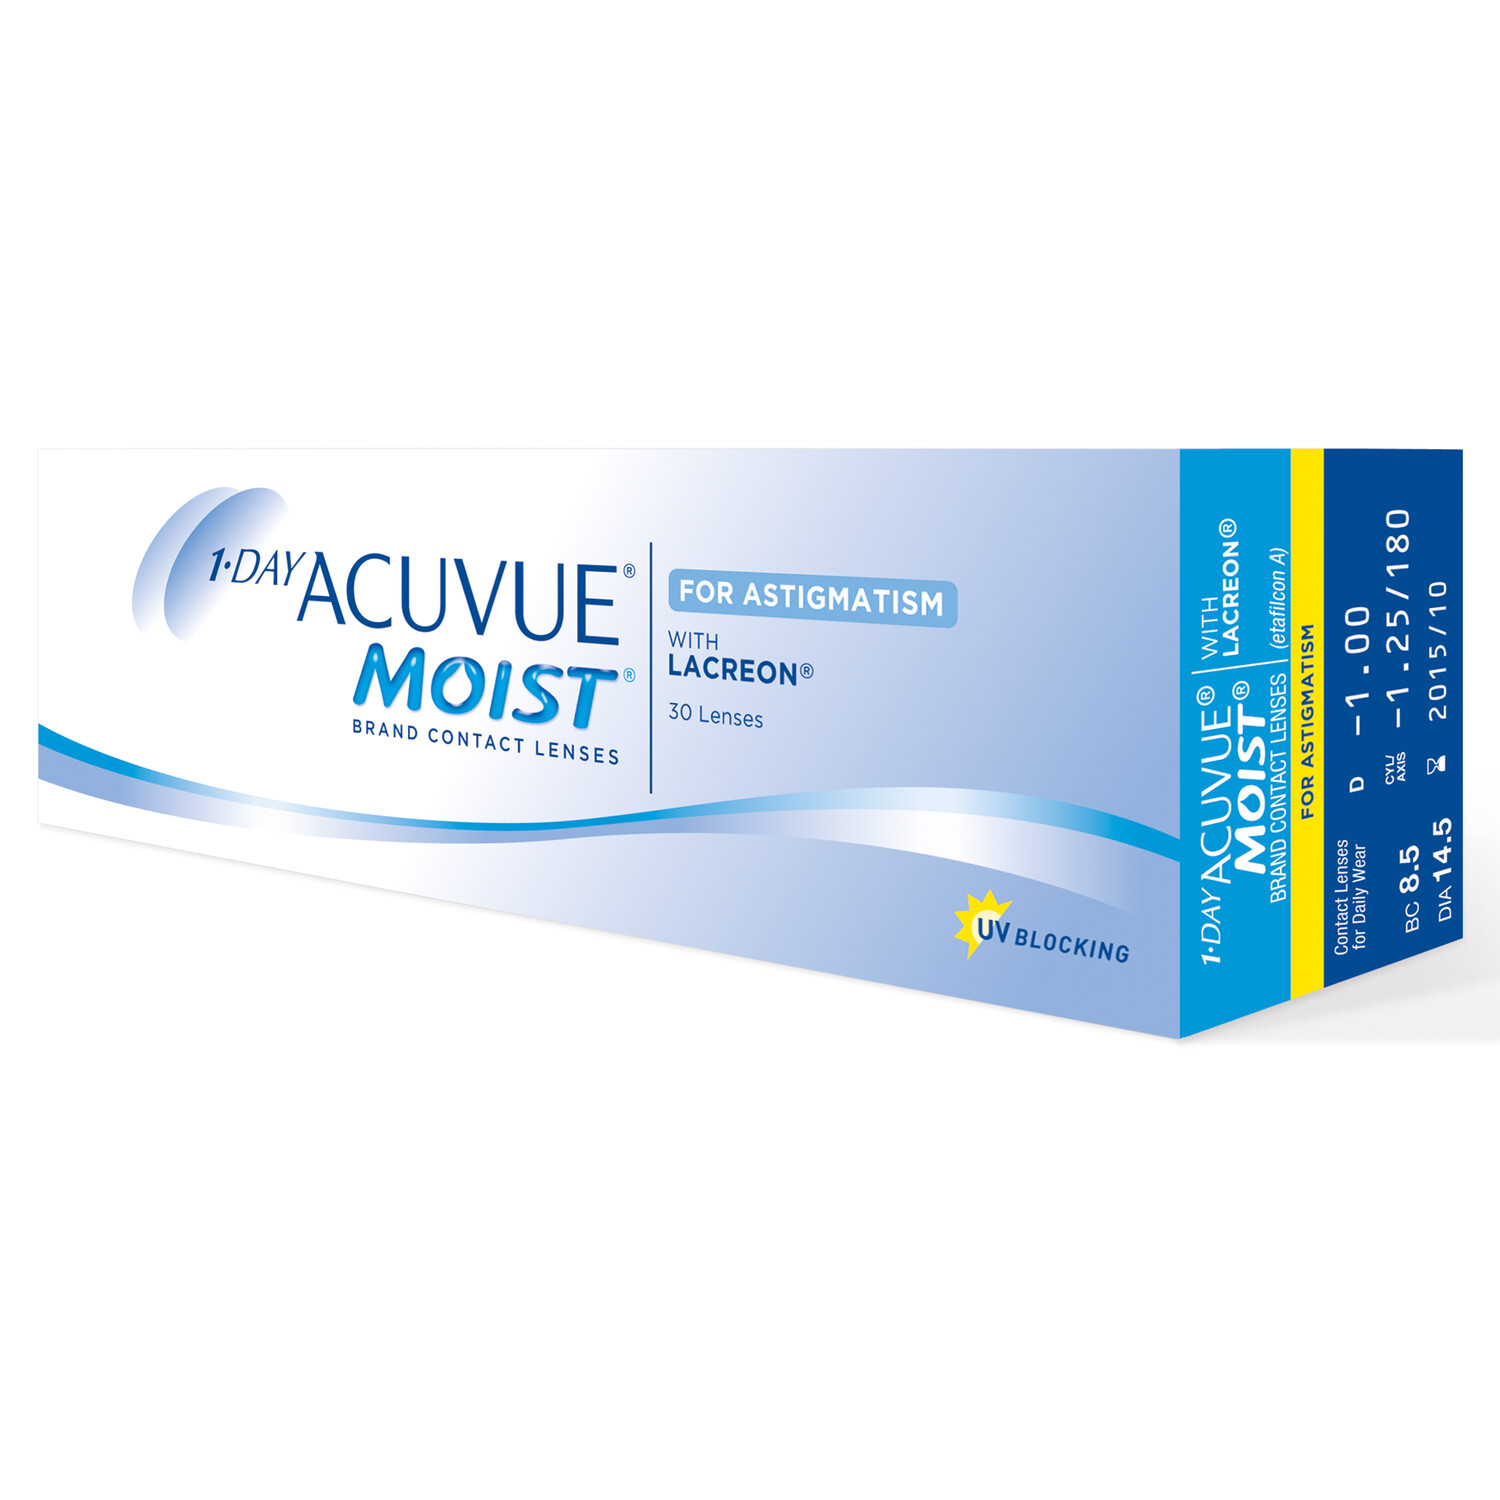 1-DAY ACUVUE® MOIST for ASTIGMATISM 30 LENS BOX